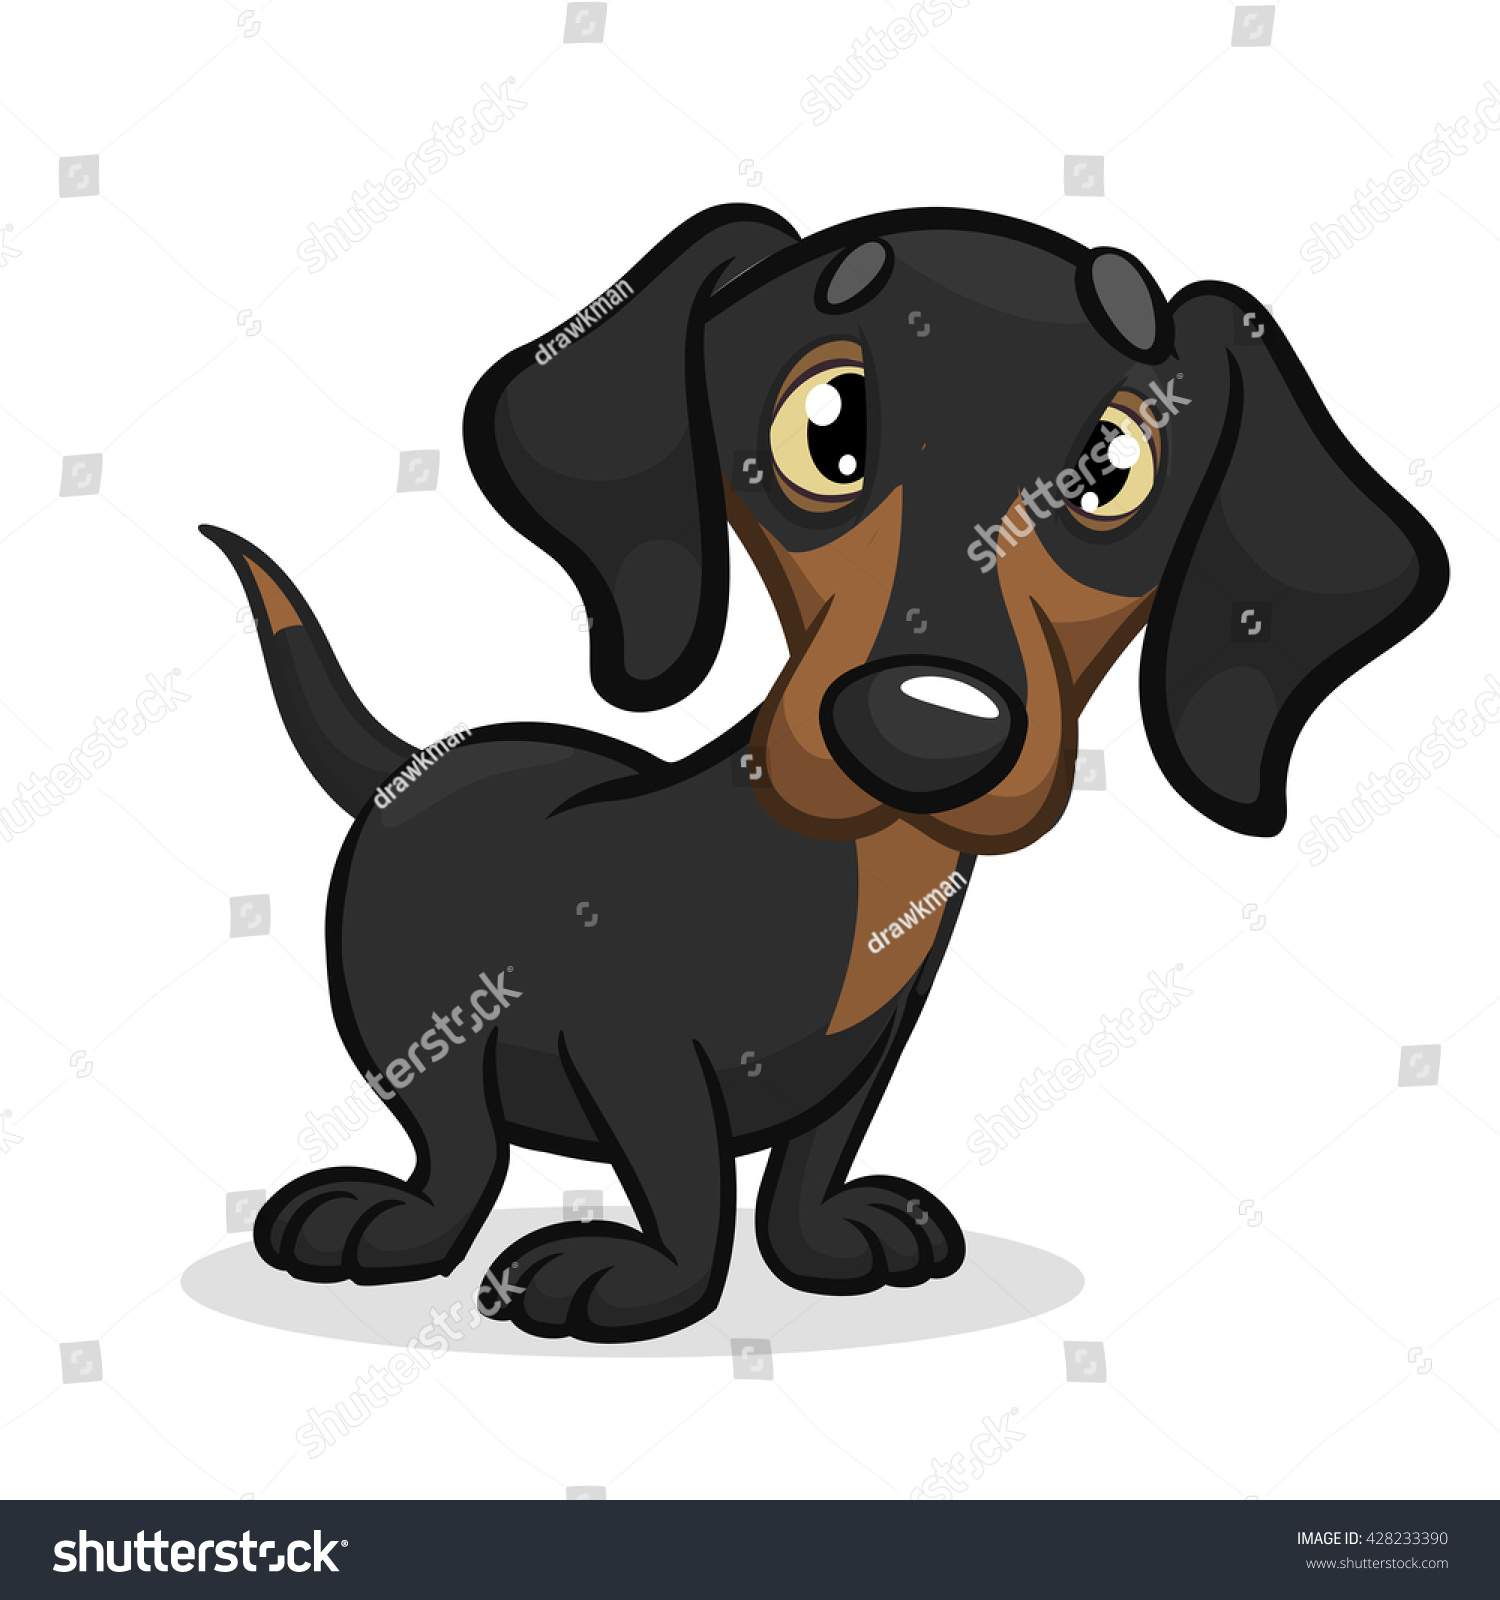 SVG of Cartoon Vector Illustration of Cute Purebred Dachshund Dog. Isolated on white background svg